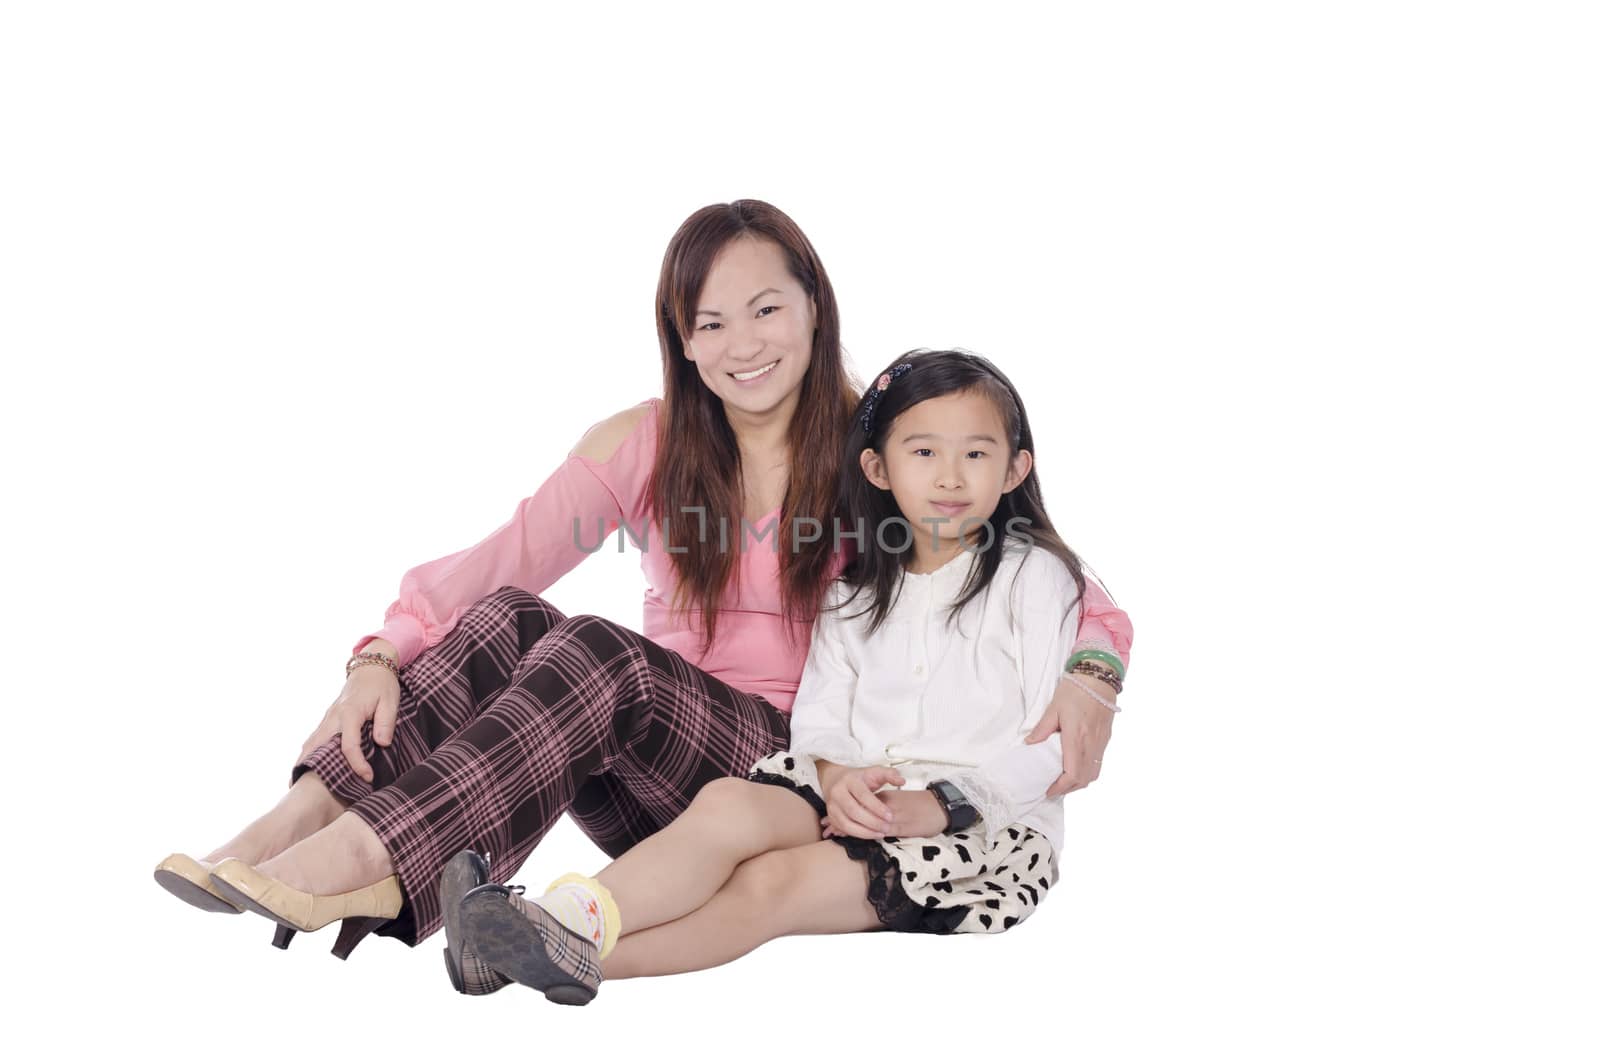 mother and daughter over white background